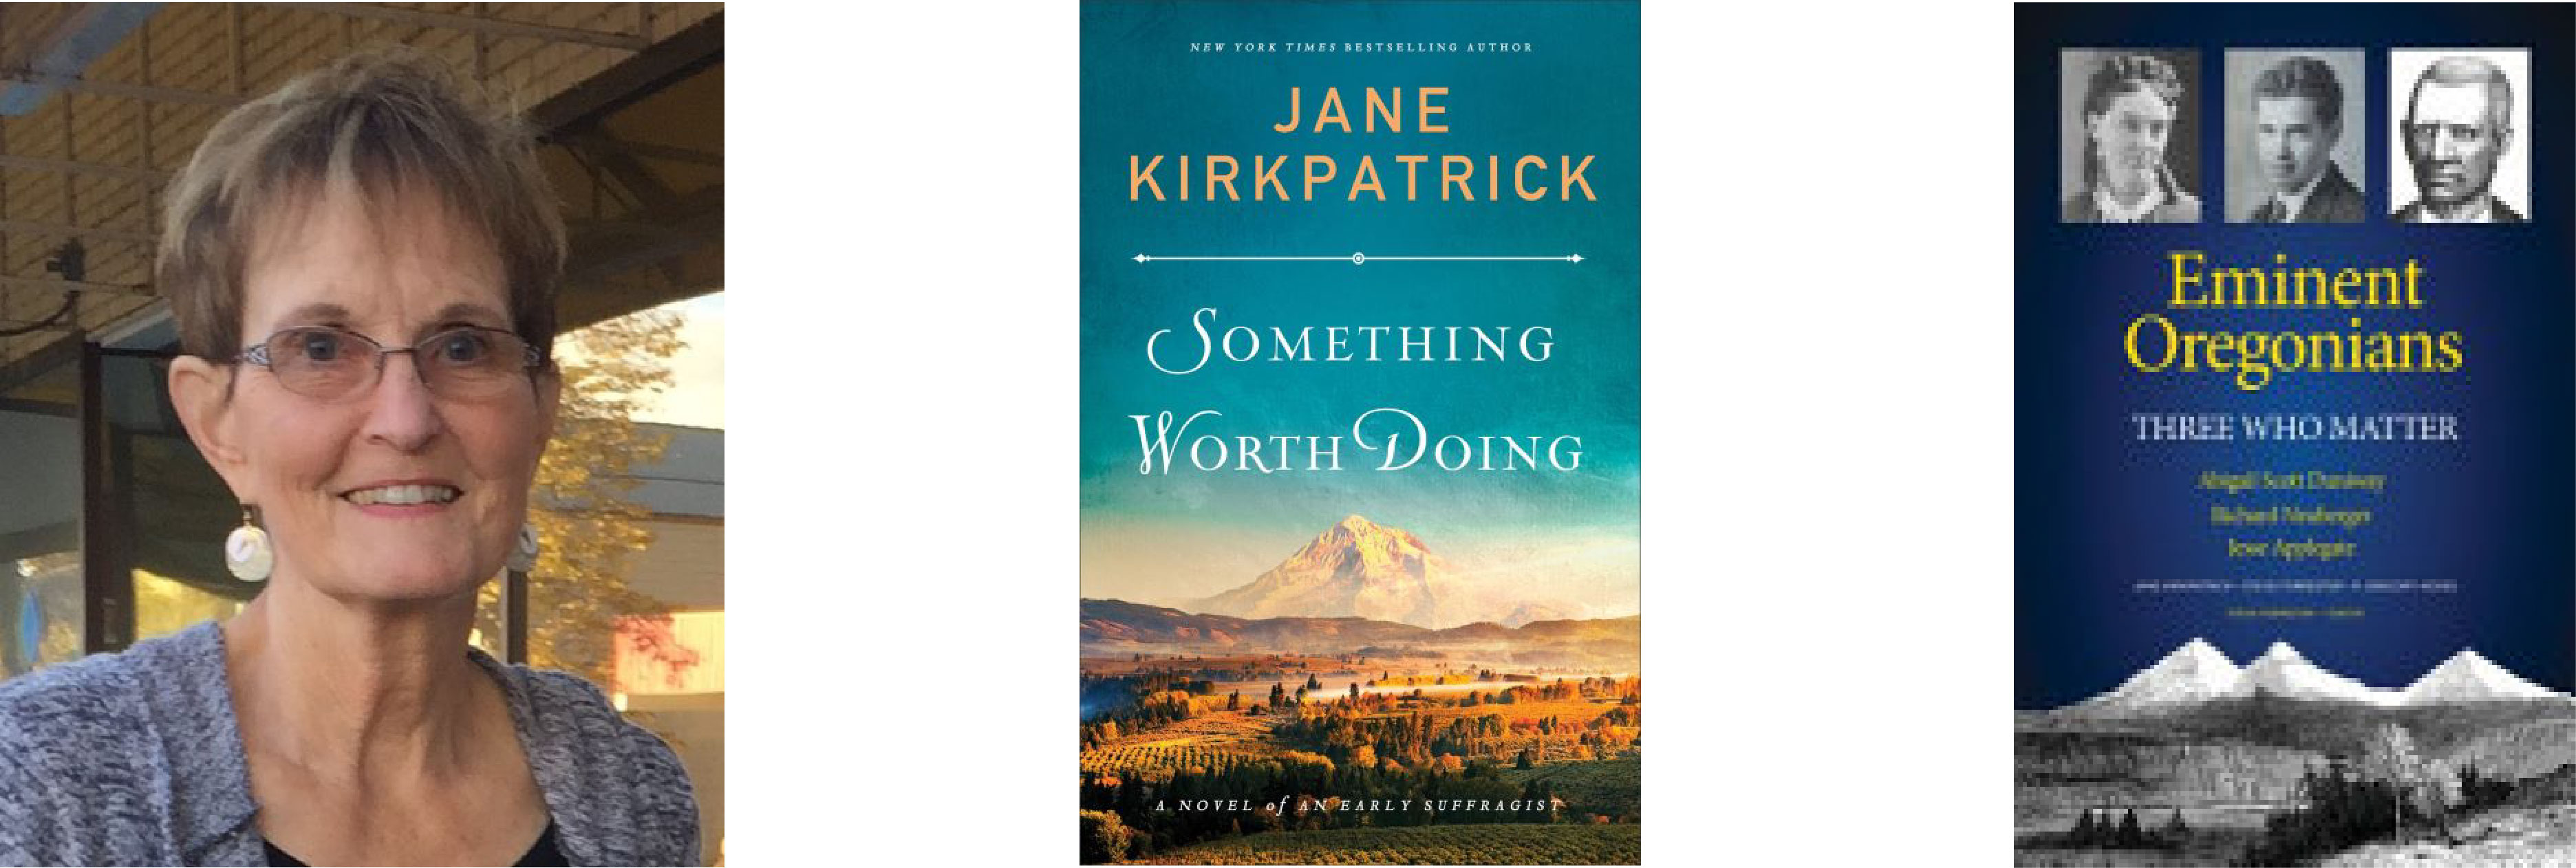 Left to right, a woman with short blonde hair and glasses. Cover of book titled Something Worth Doing: A Novel of an Early Suffragist by Jane Kirkpatrick. Blue book cover titled Eminent Oregonians, 3 black and white photos of people at top.